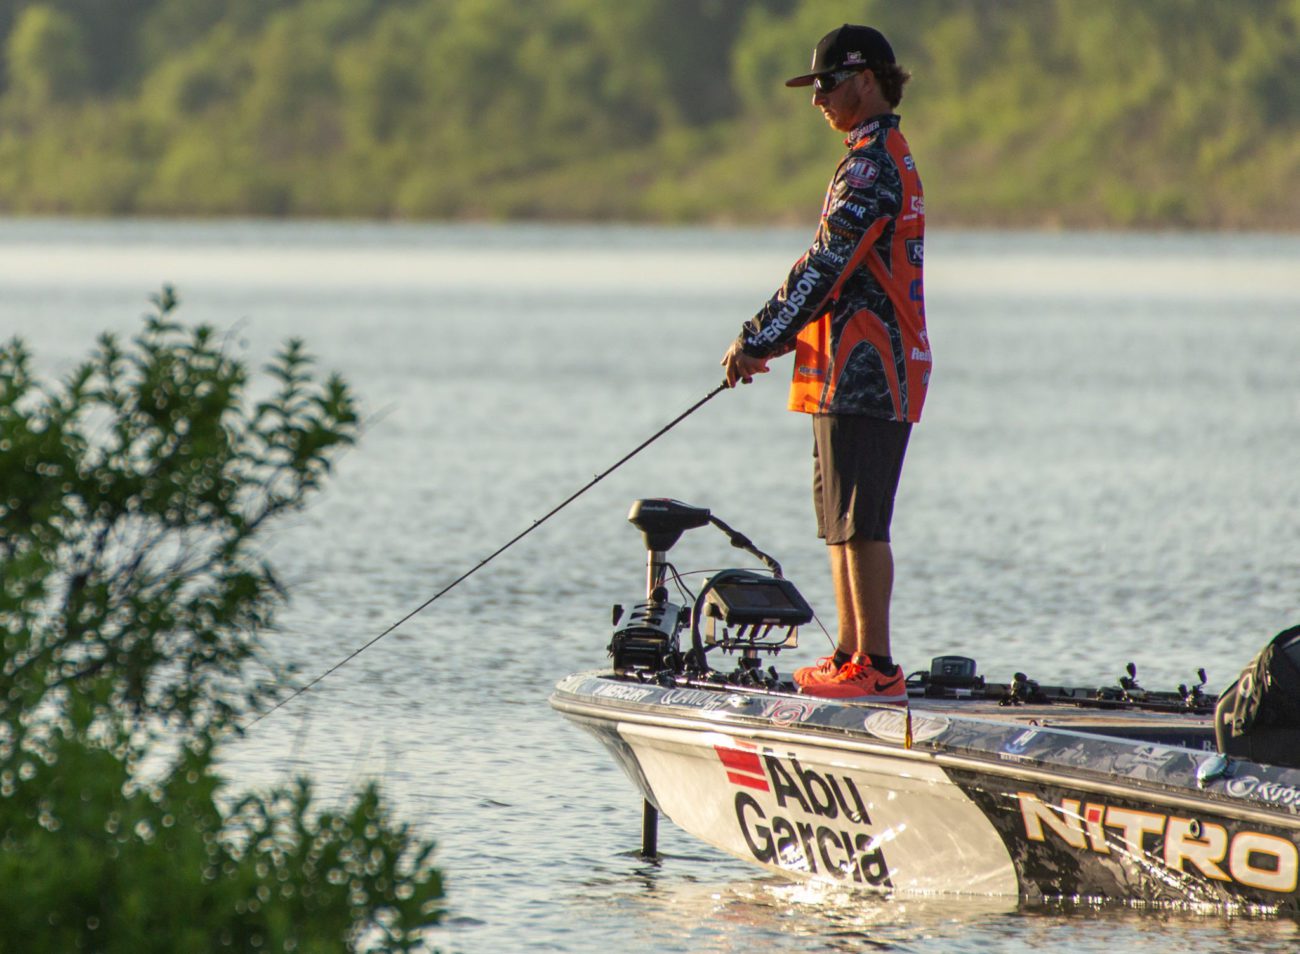 Abu Garcia, Berkley Expand MLF Support to Include Bass Pro Tour